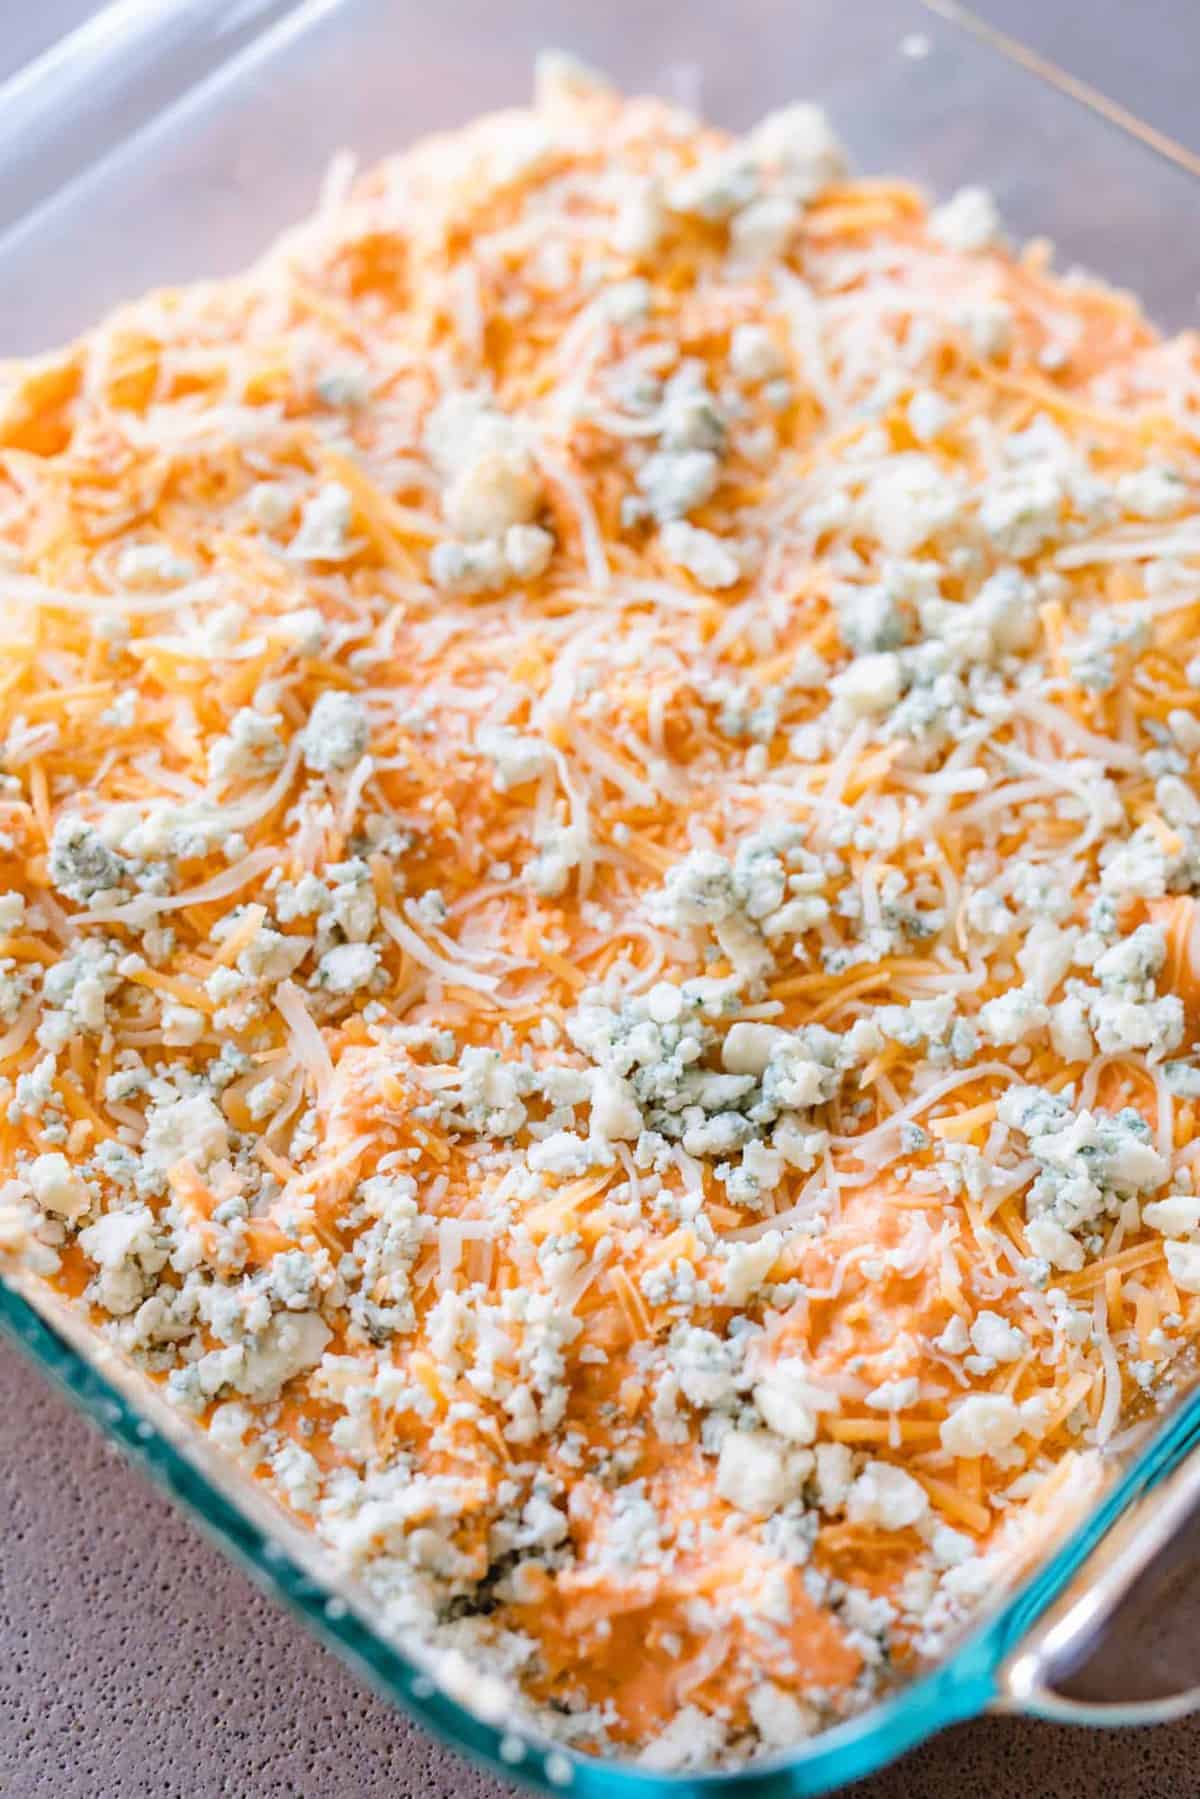 Dip mixture has been moved to a baking dish and is topped with bleu cheese crumbles.